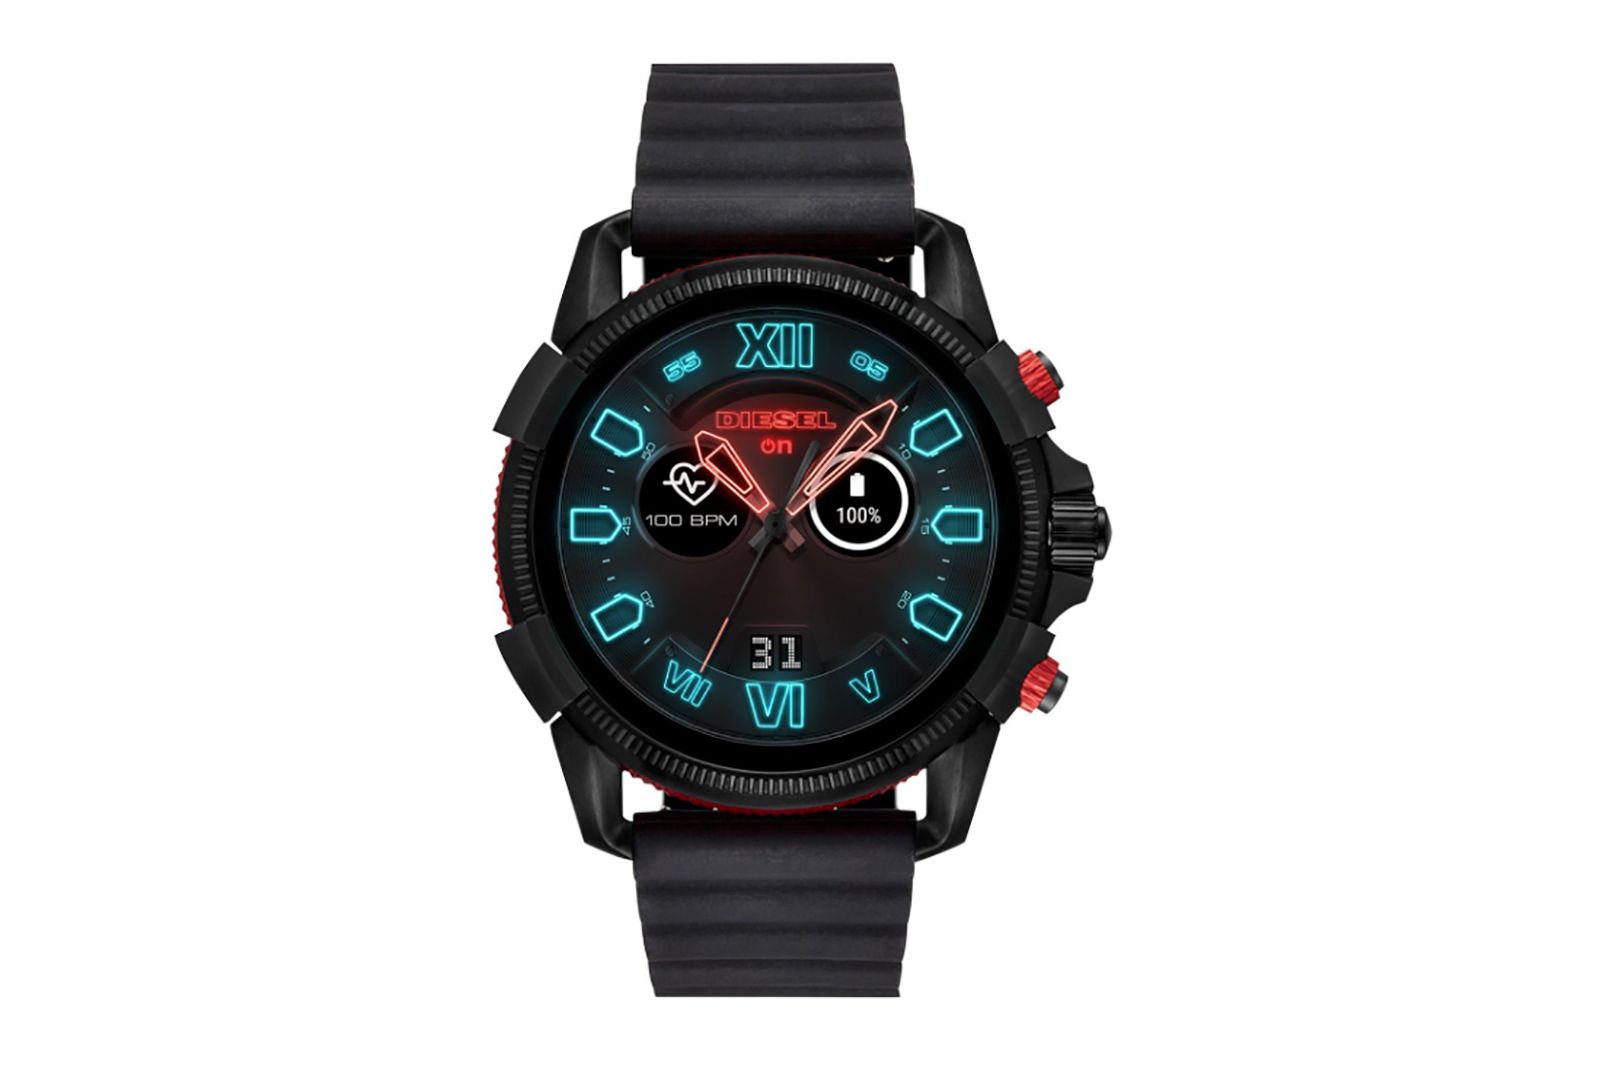 Diesel Full Guard 25 is the biggest Wear OS watch around image 1